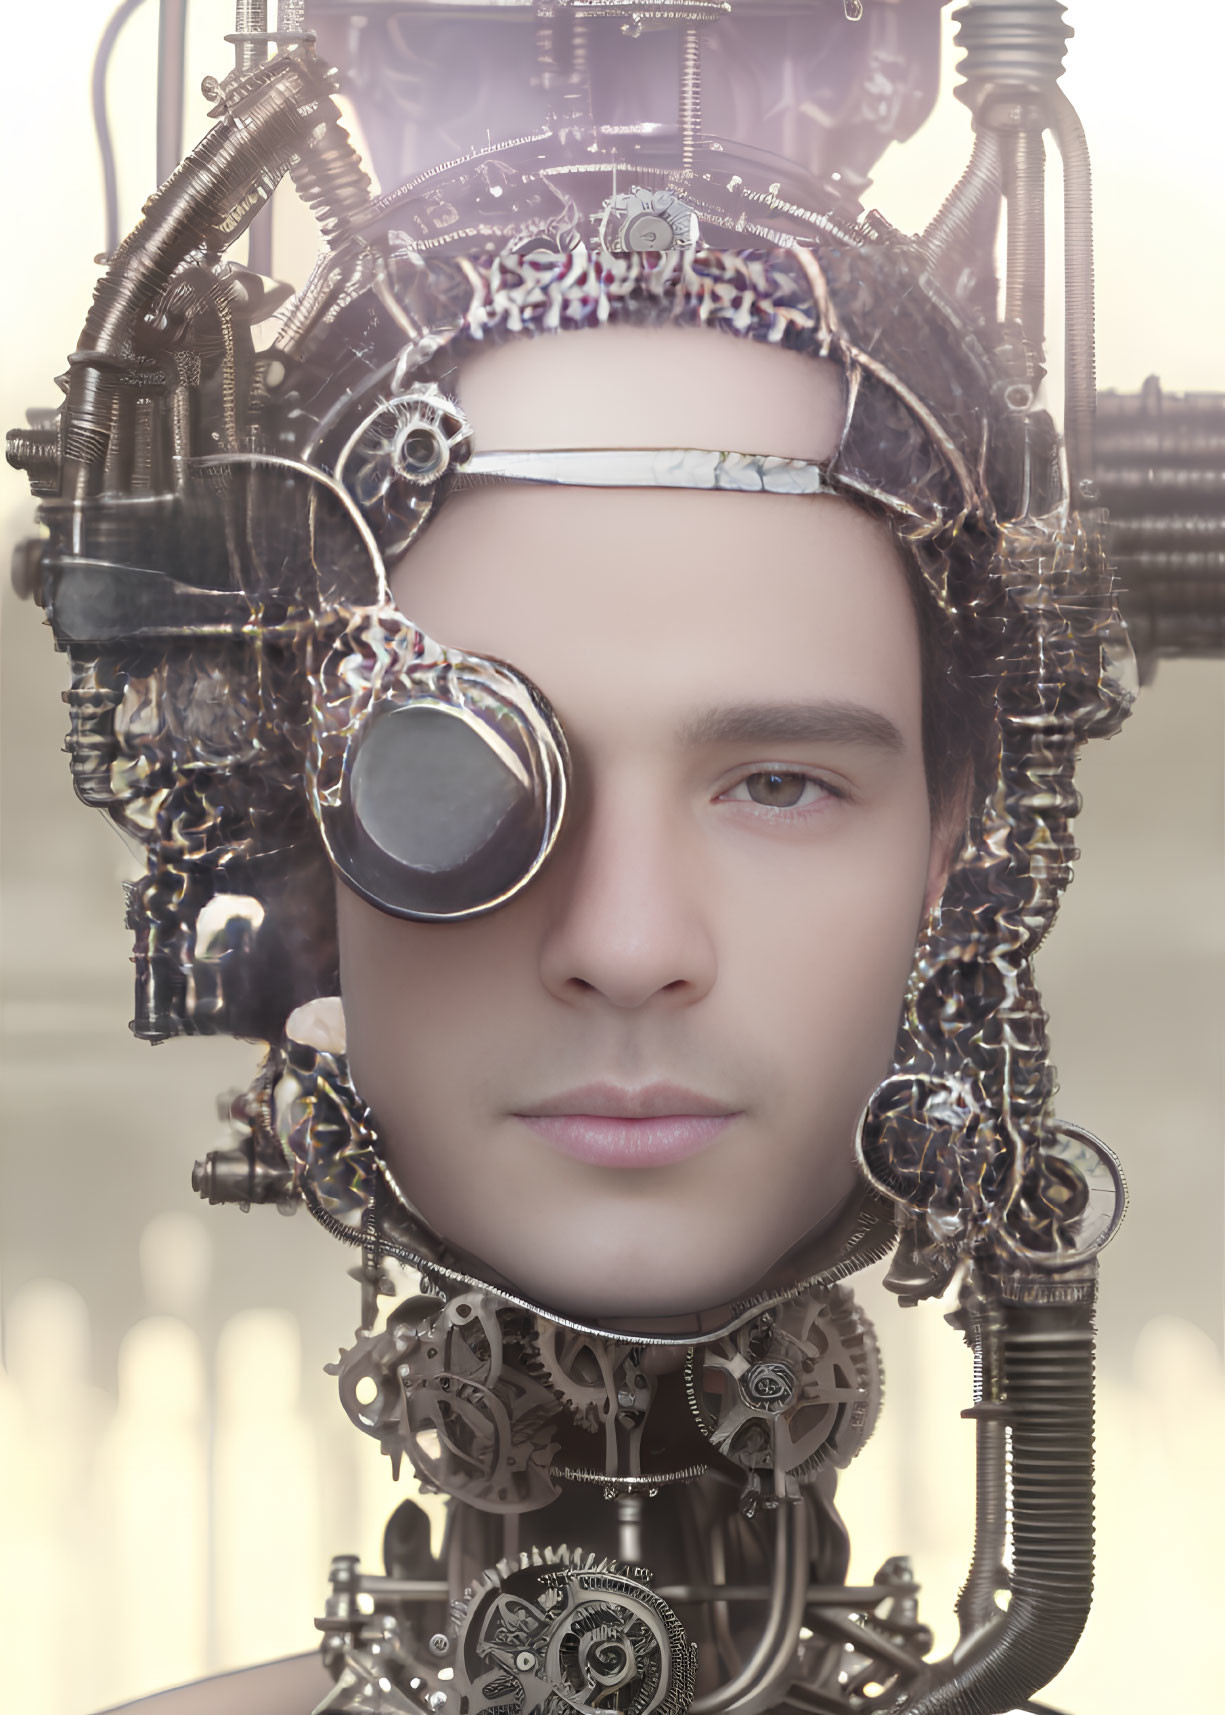 Steampunk-style portrait with mechanical enhancements.